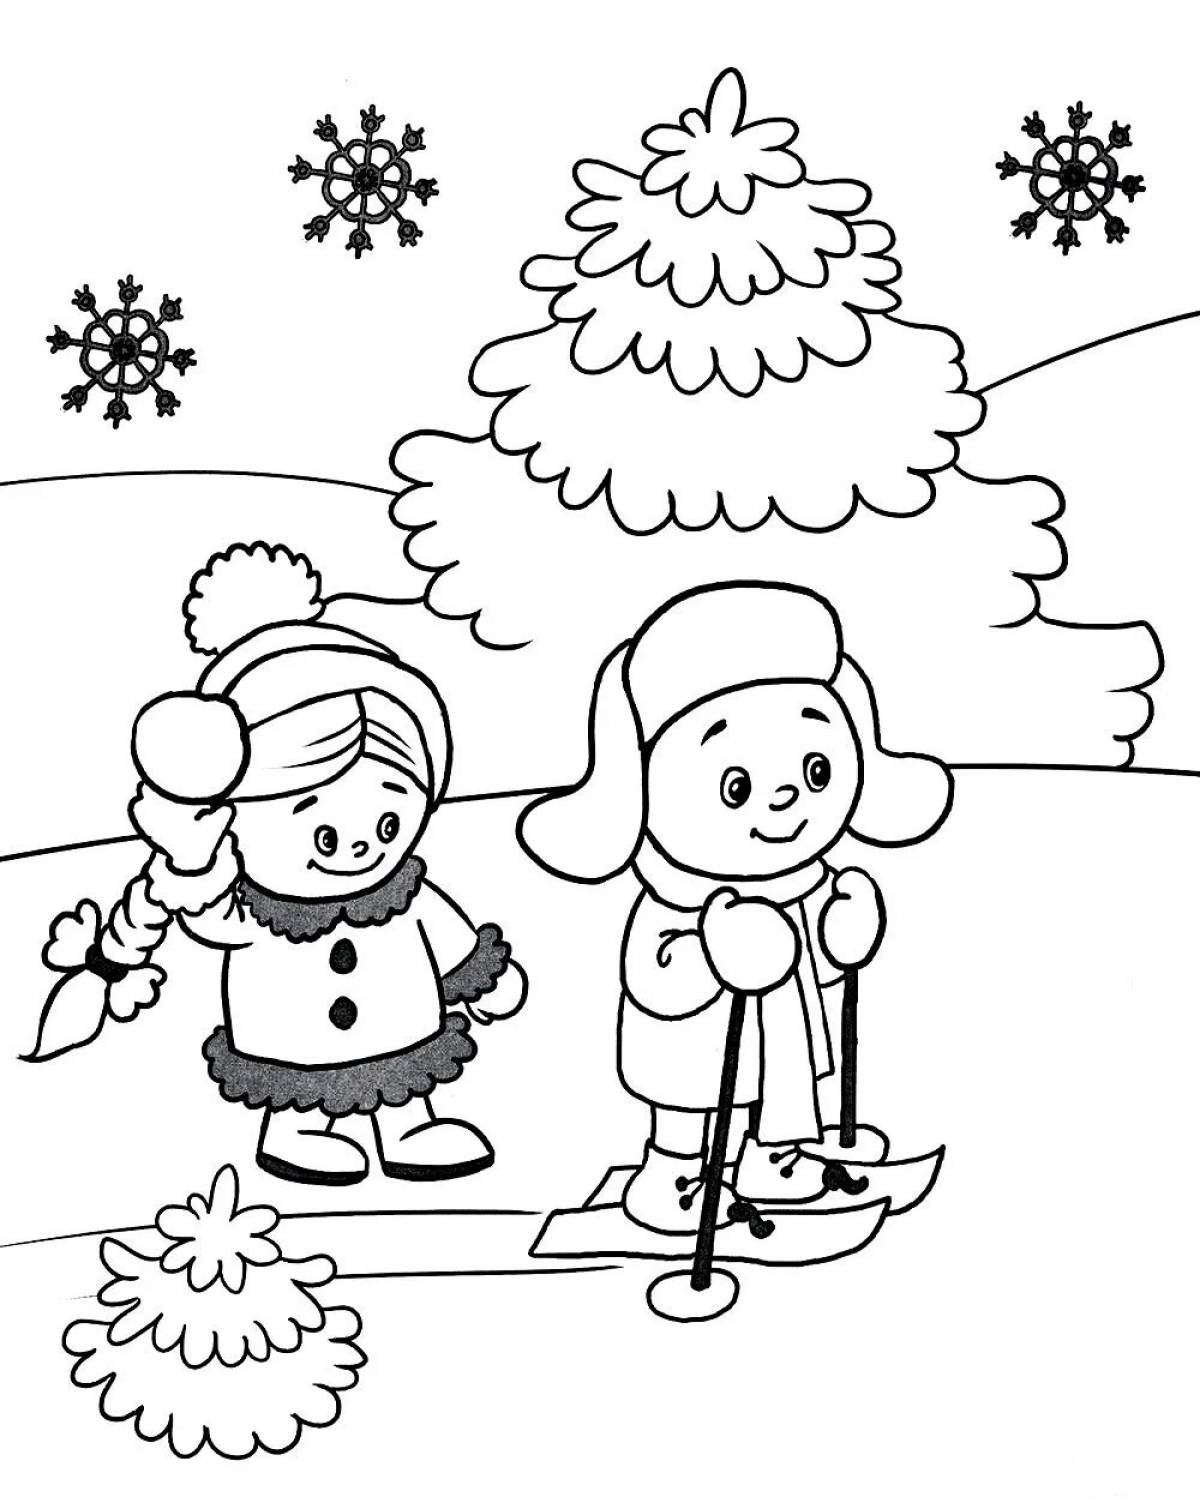 Animated winter coloring book for children 6 years old